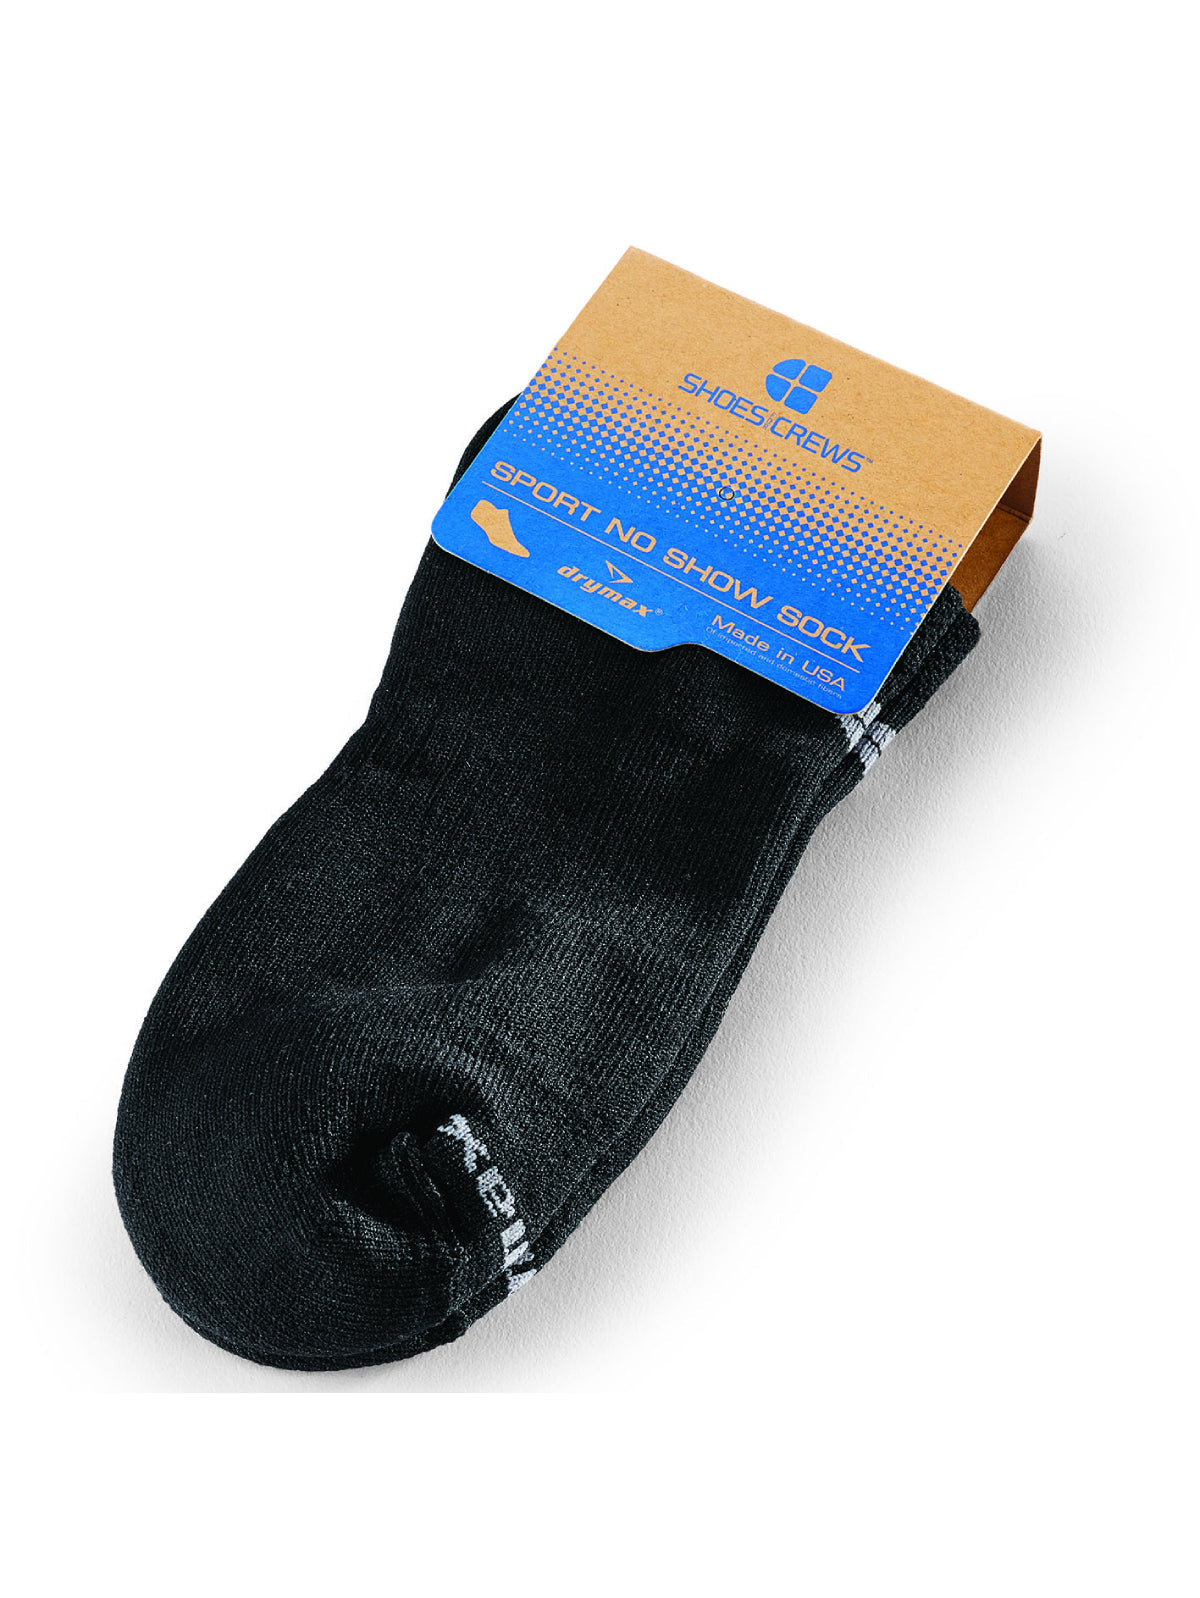 Unisex No-Show Sock Black by  Shoes For Crews.